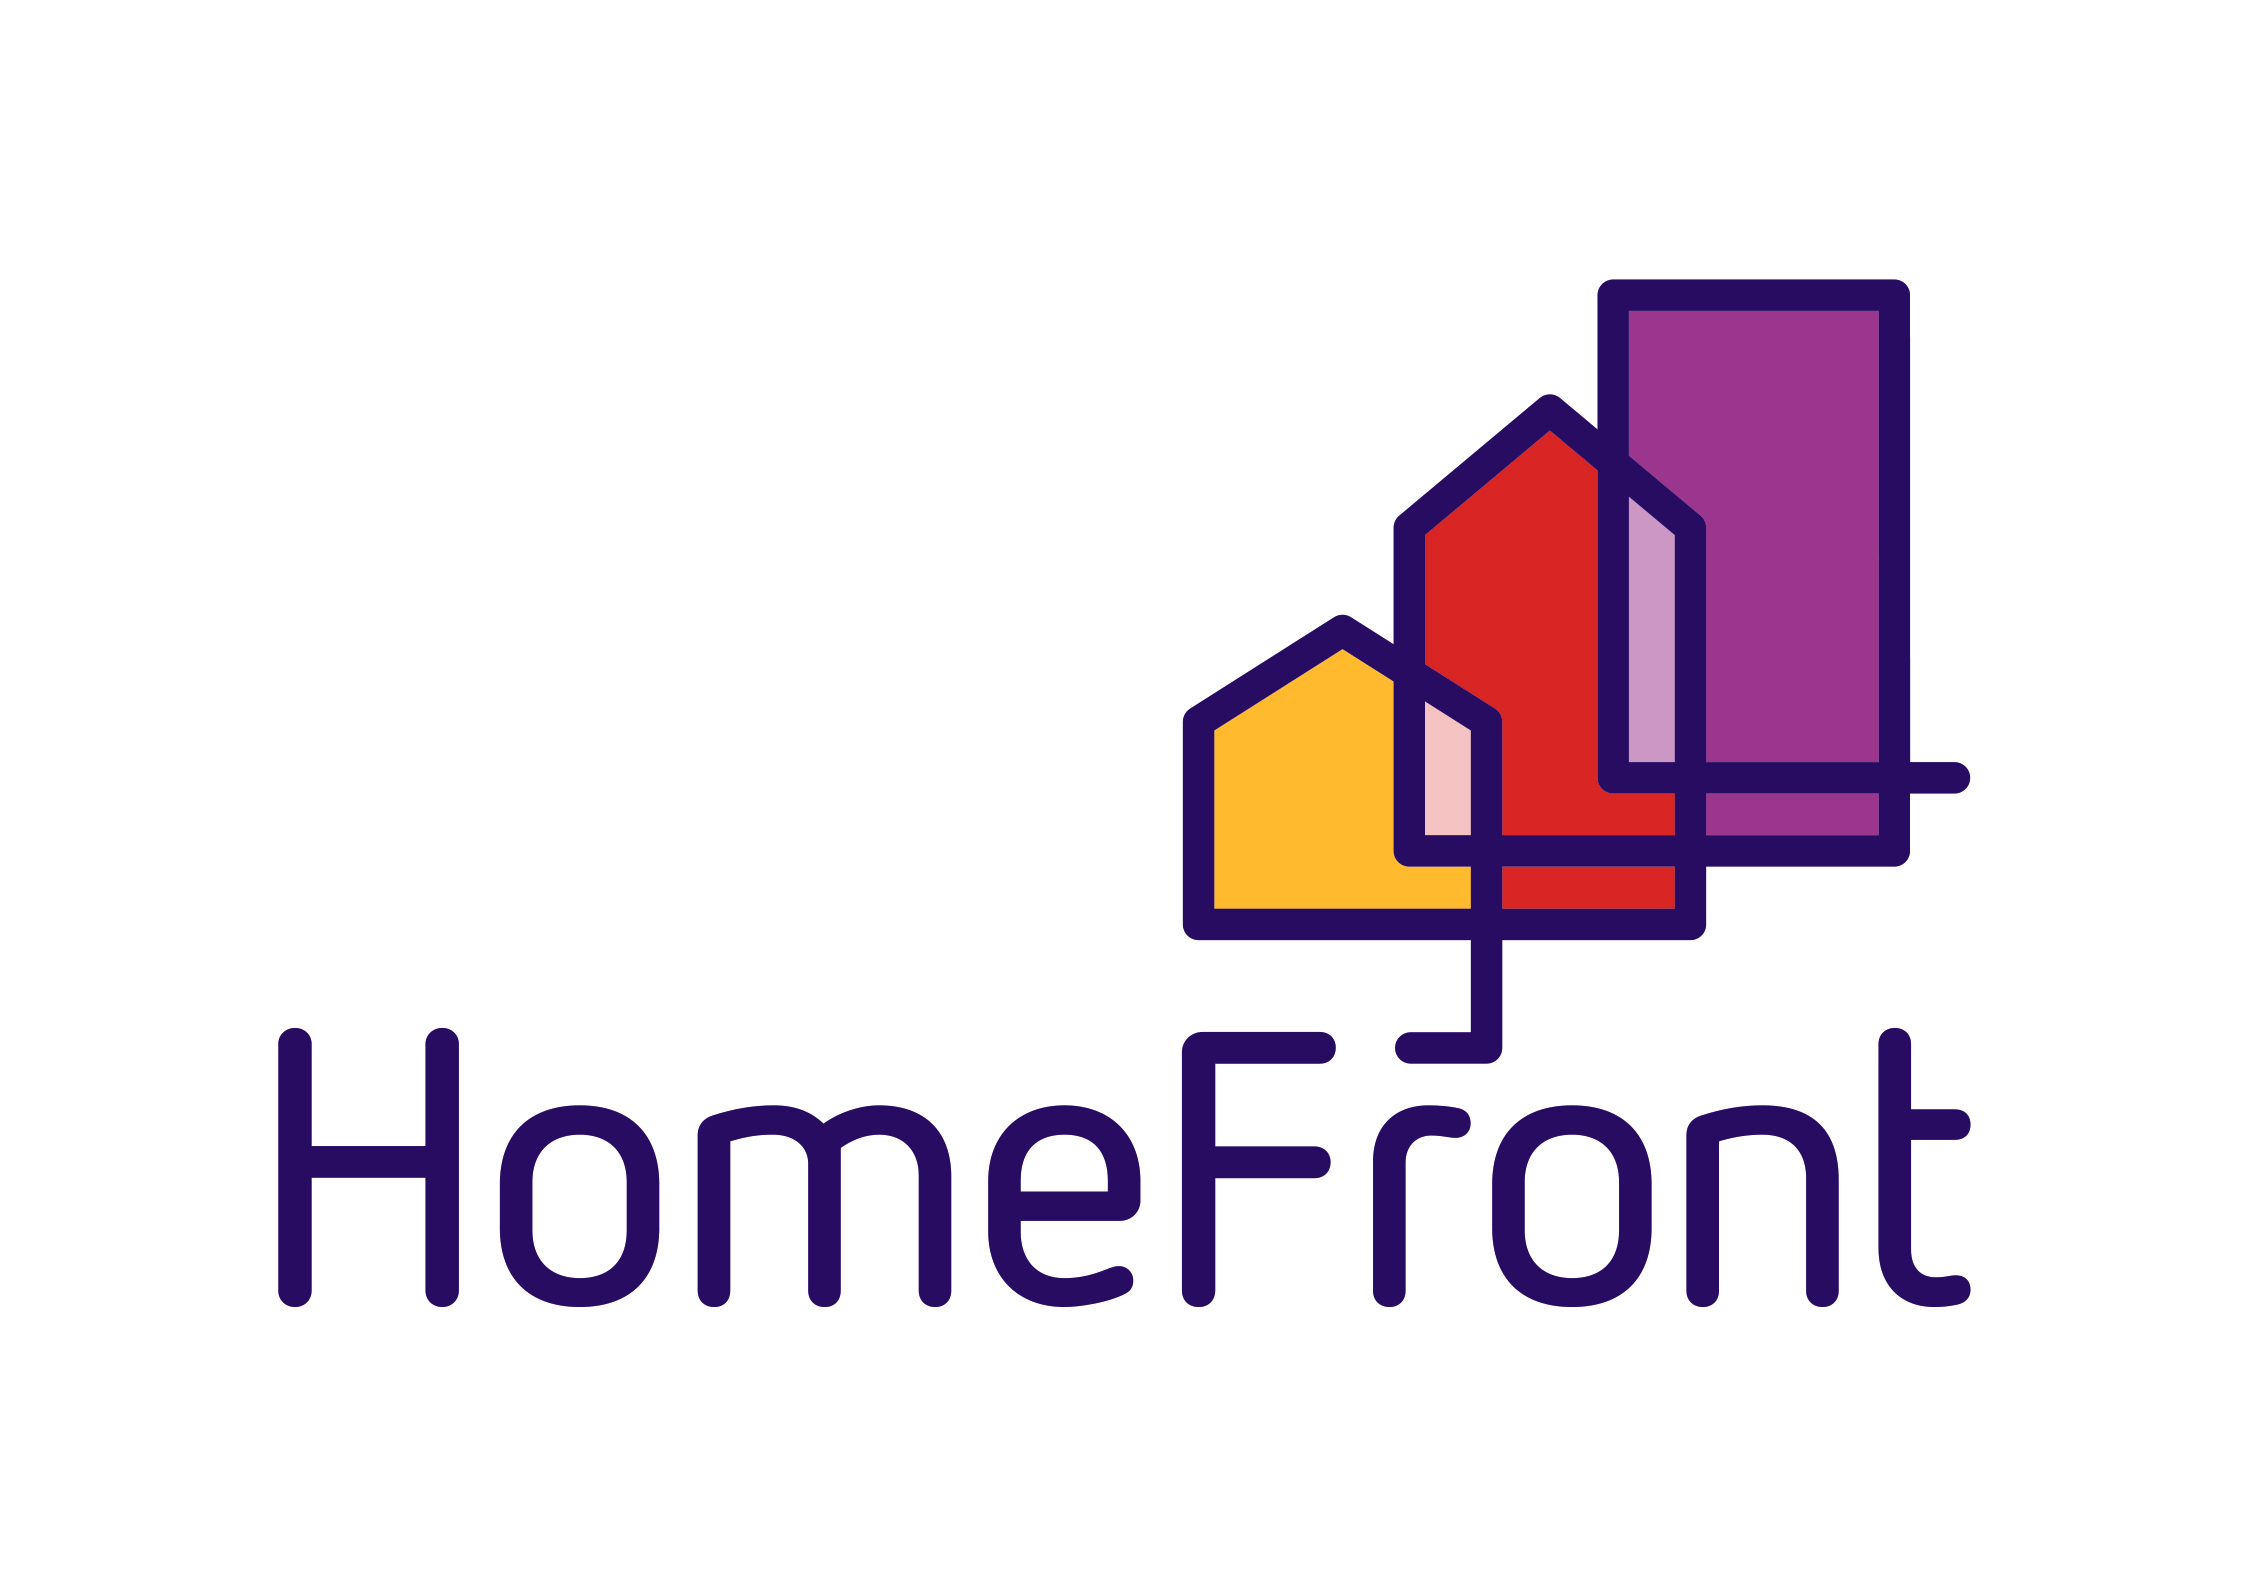 Organization logo of HomeFront (formerly the Housing Authority of Billings)